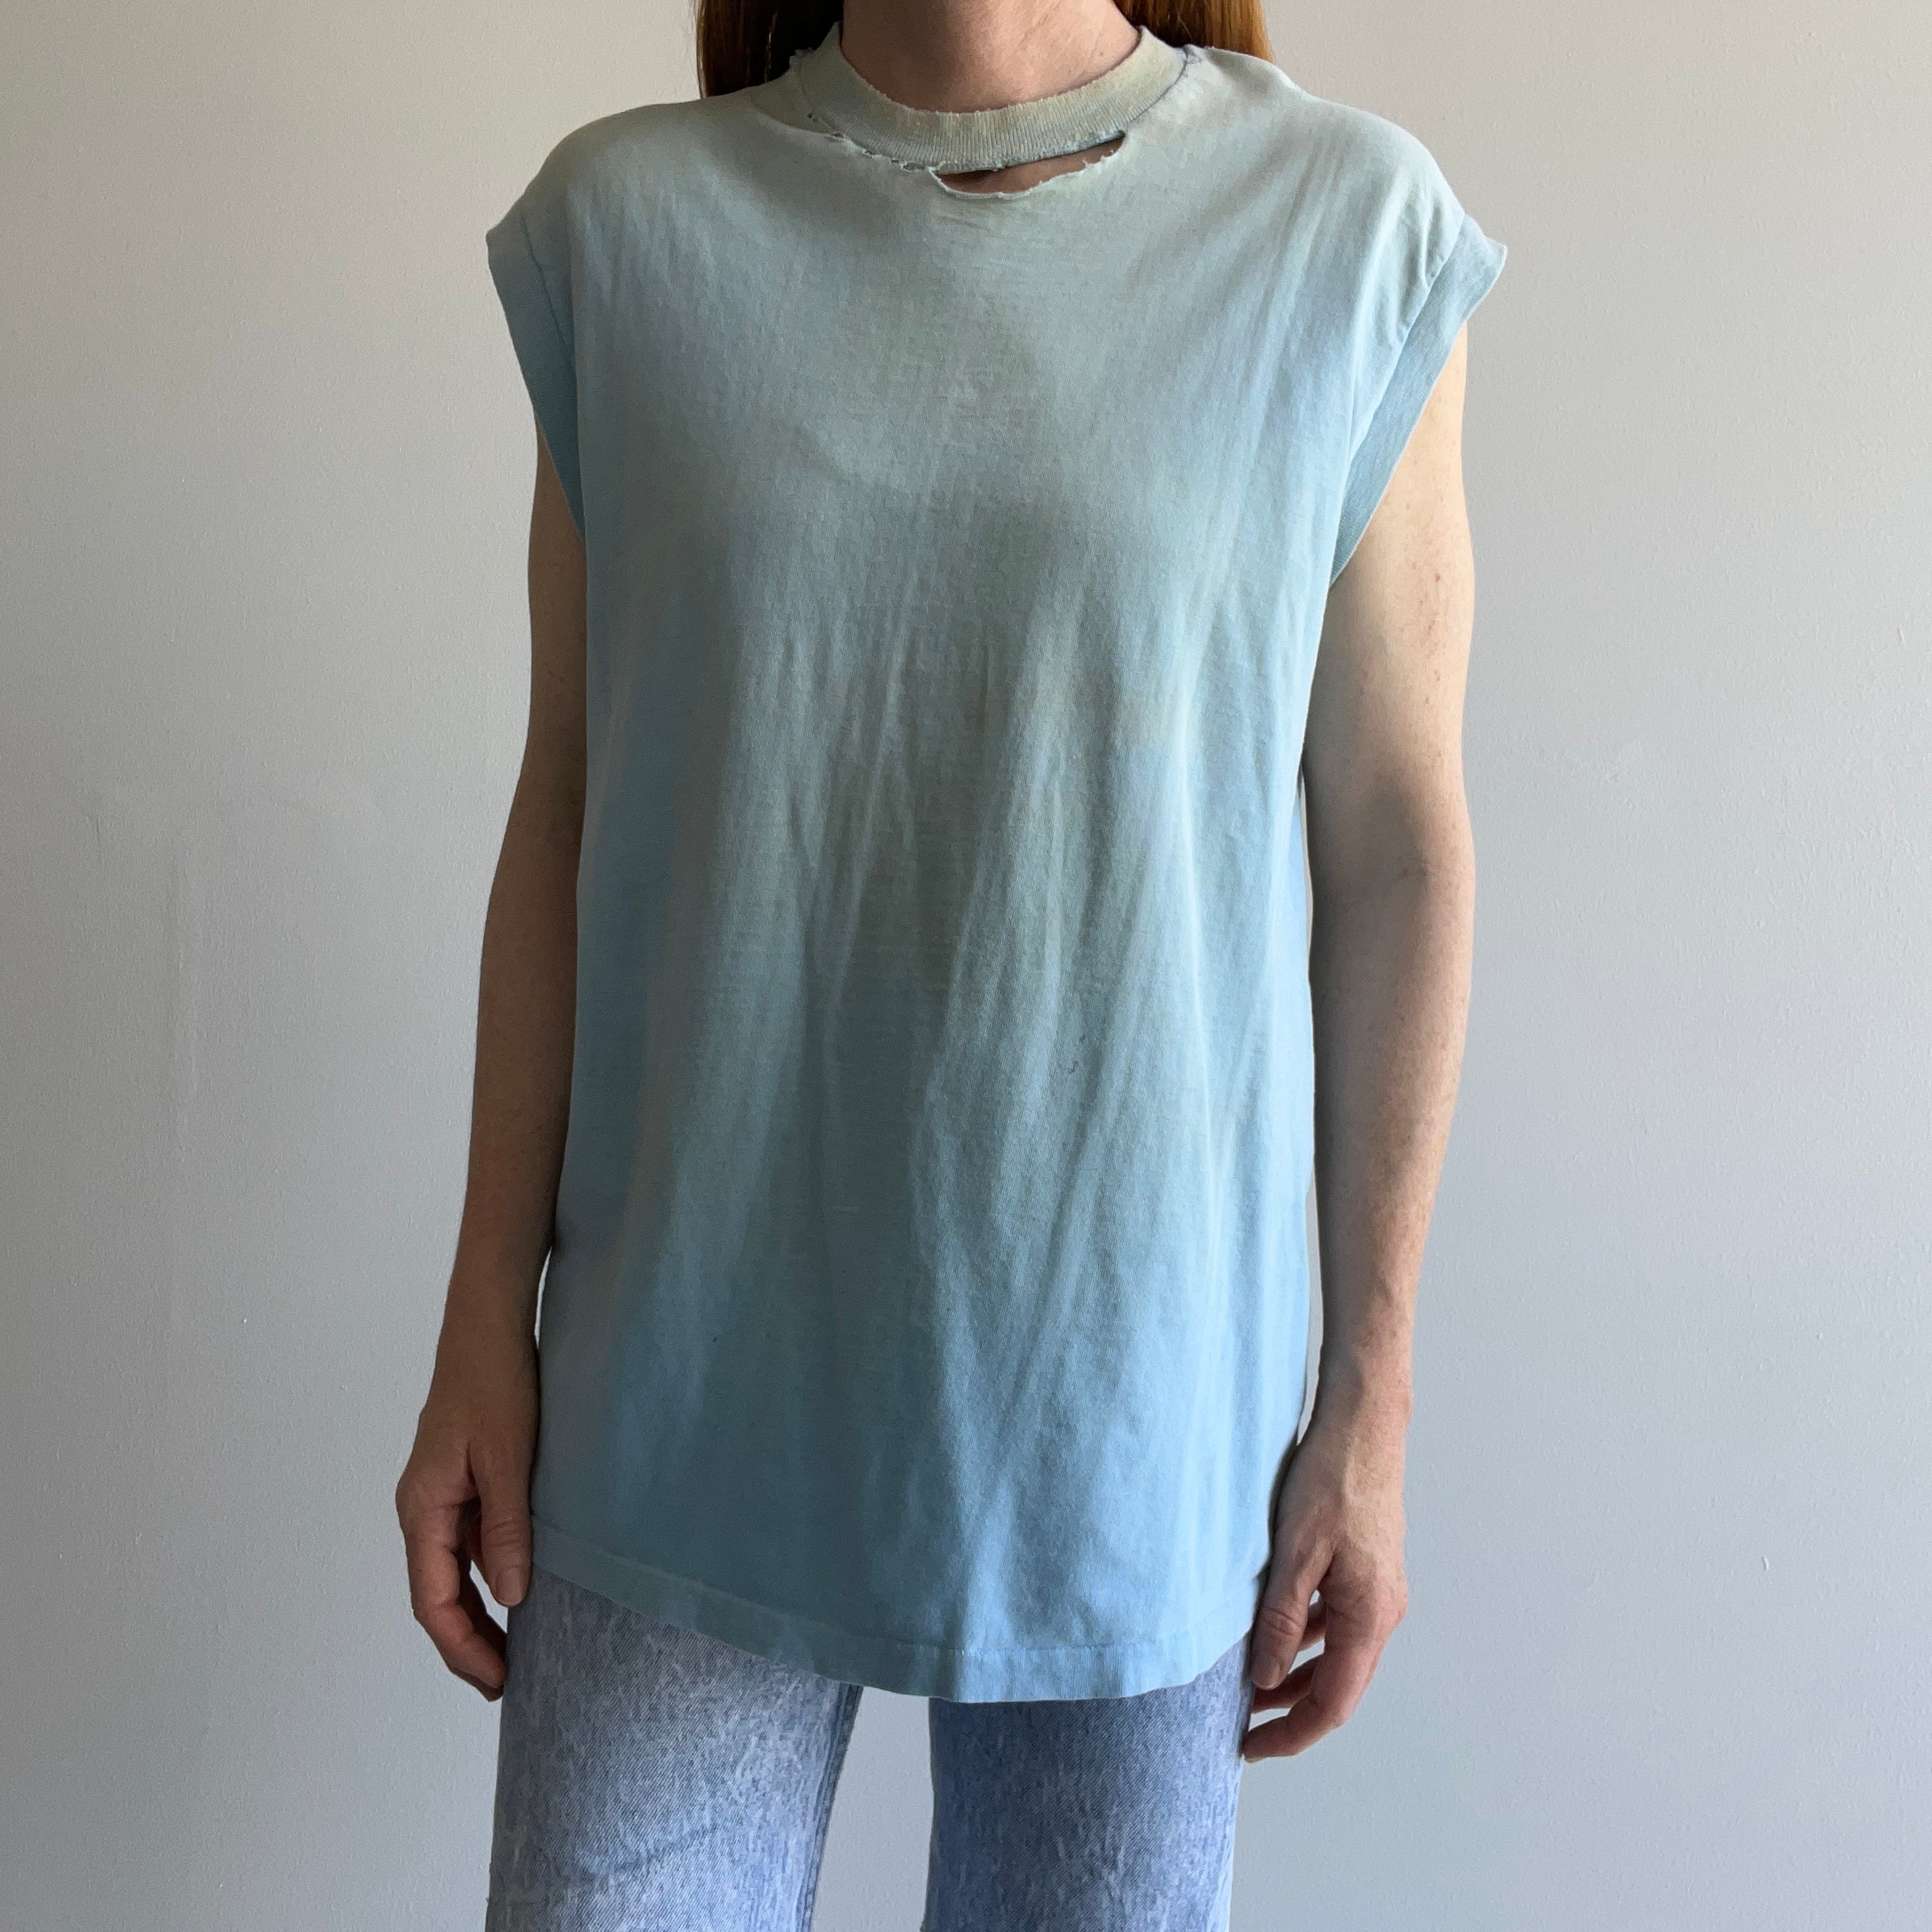 1970s Collectible (But Also Utterly Destroyed) Baby Blue Beat Up Shredded Town Craft Muscle Tank - Cotton